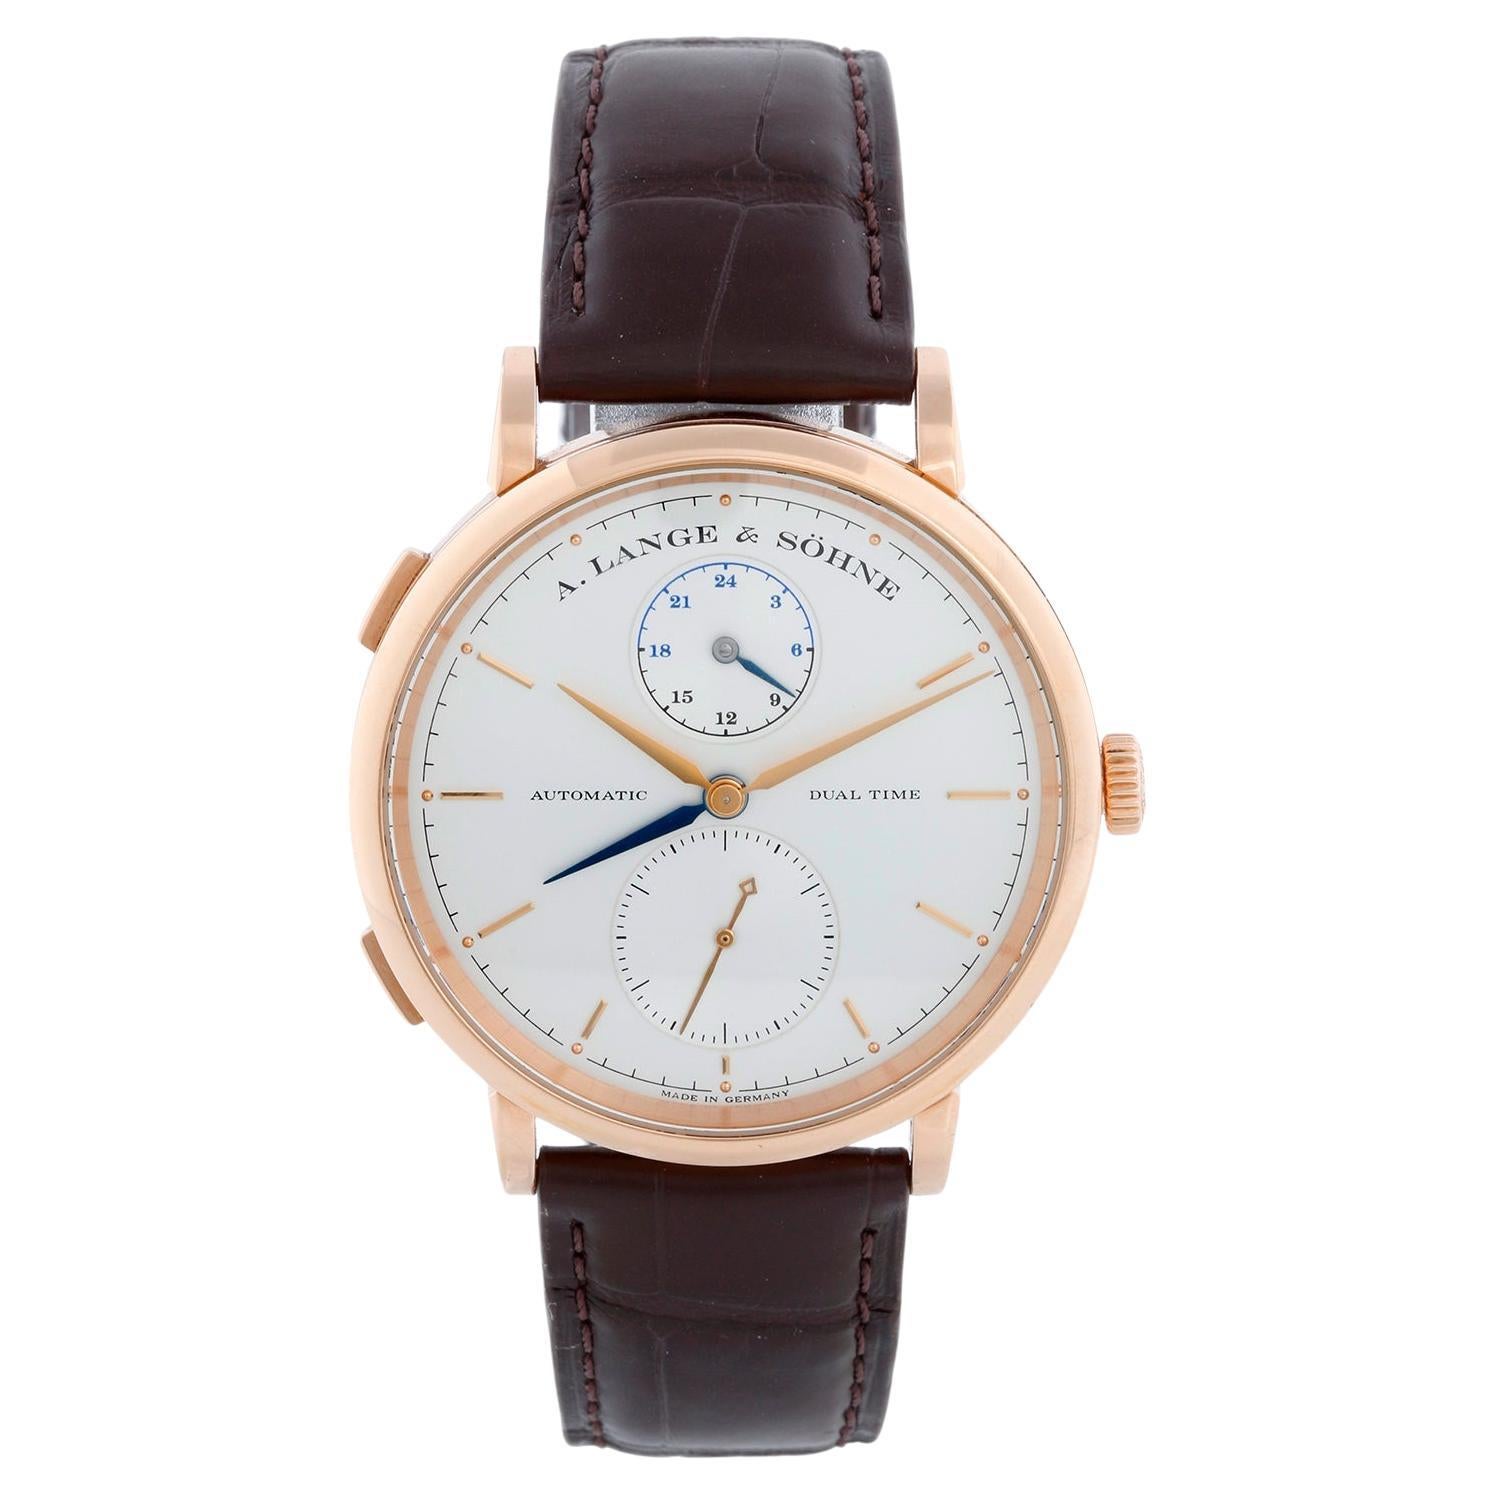 A. Lange & Söhne Saxonia Dual Time Rose Gold  Watch 385.032